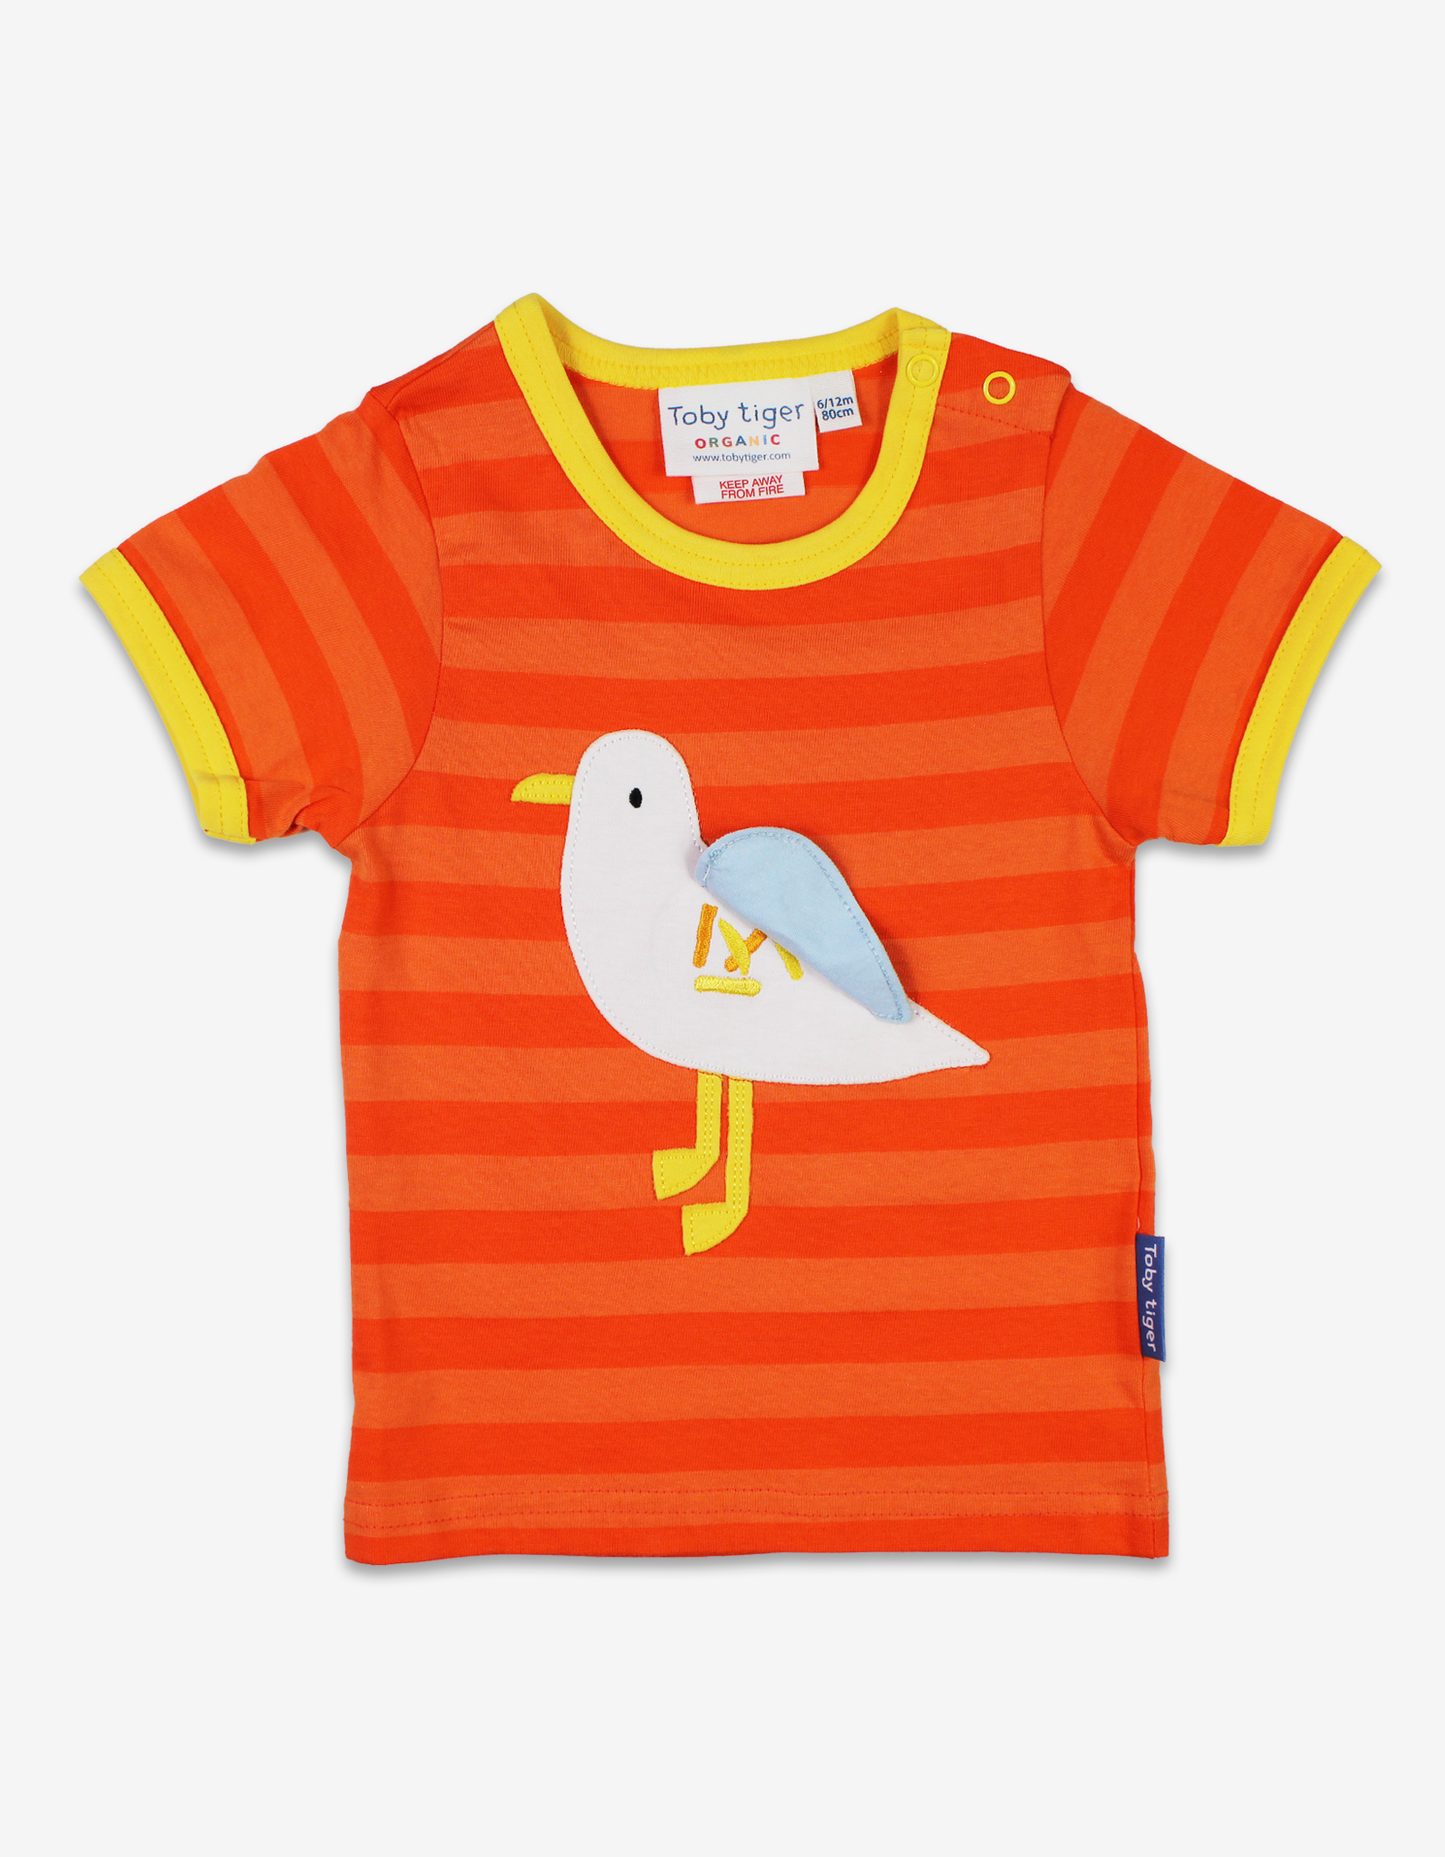 Organic cotton short-sleeved shirt with seagull appliqué